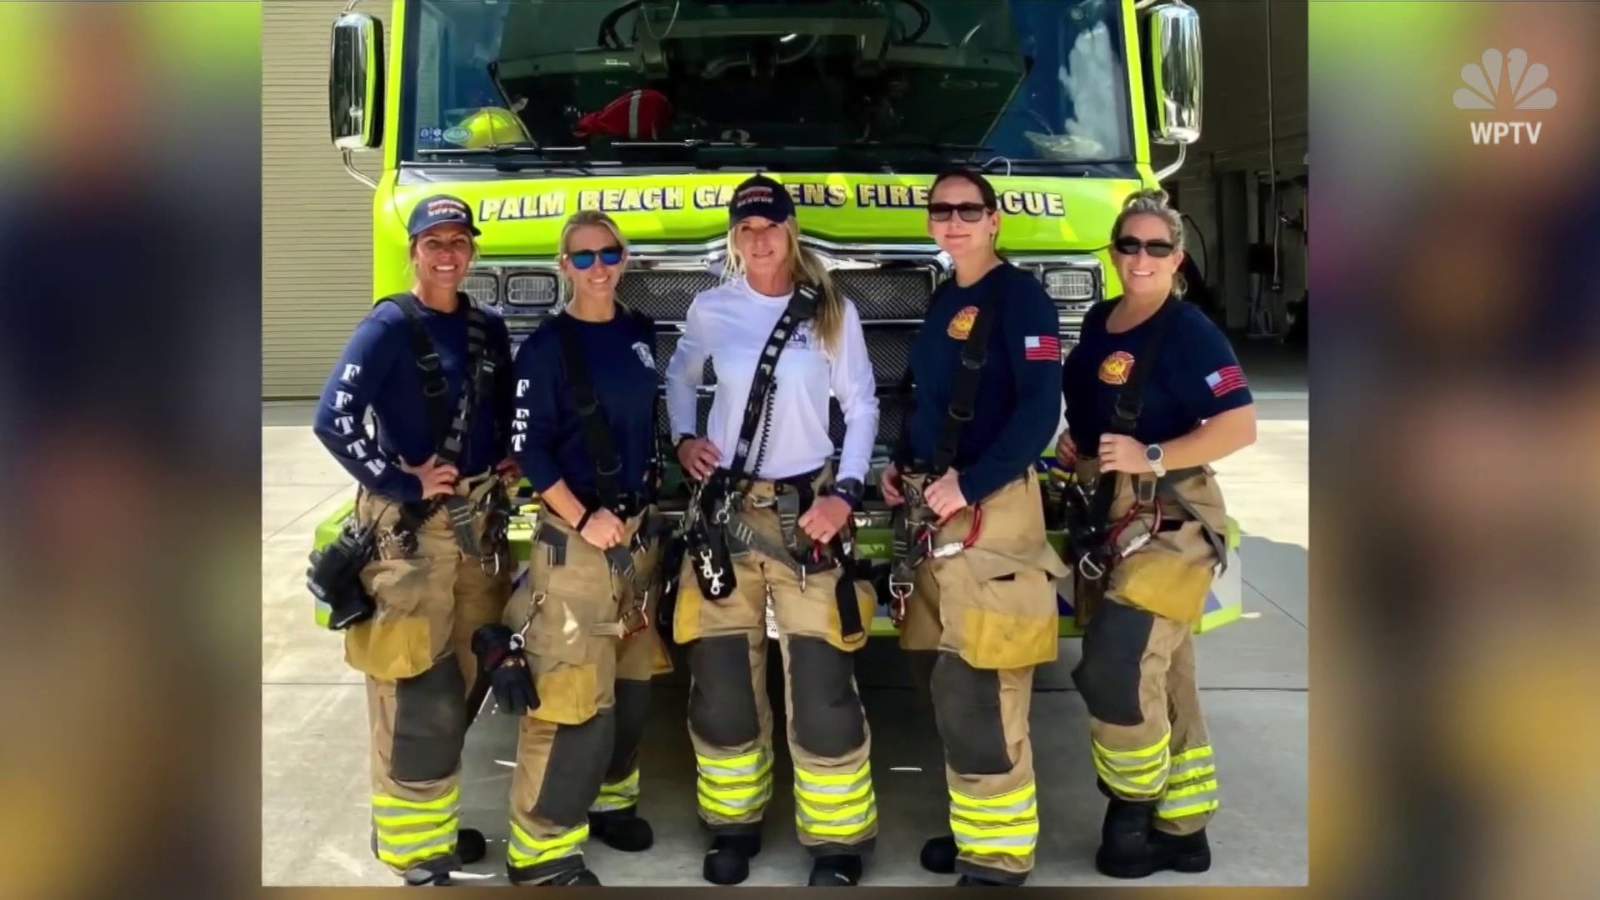 All-female fire crew in Florida shows increasing diversity in emergency services